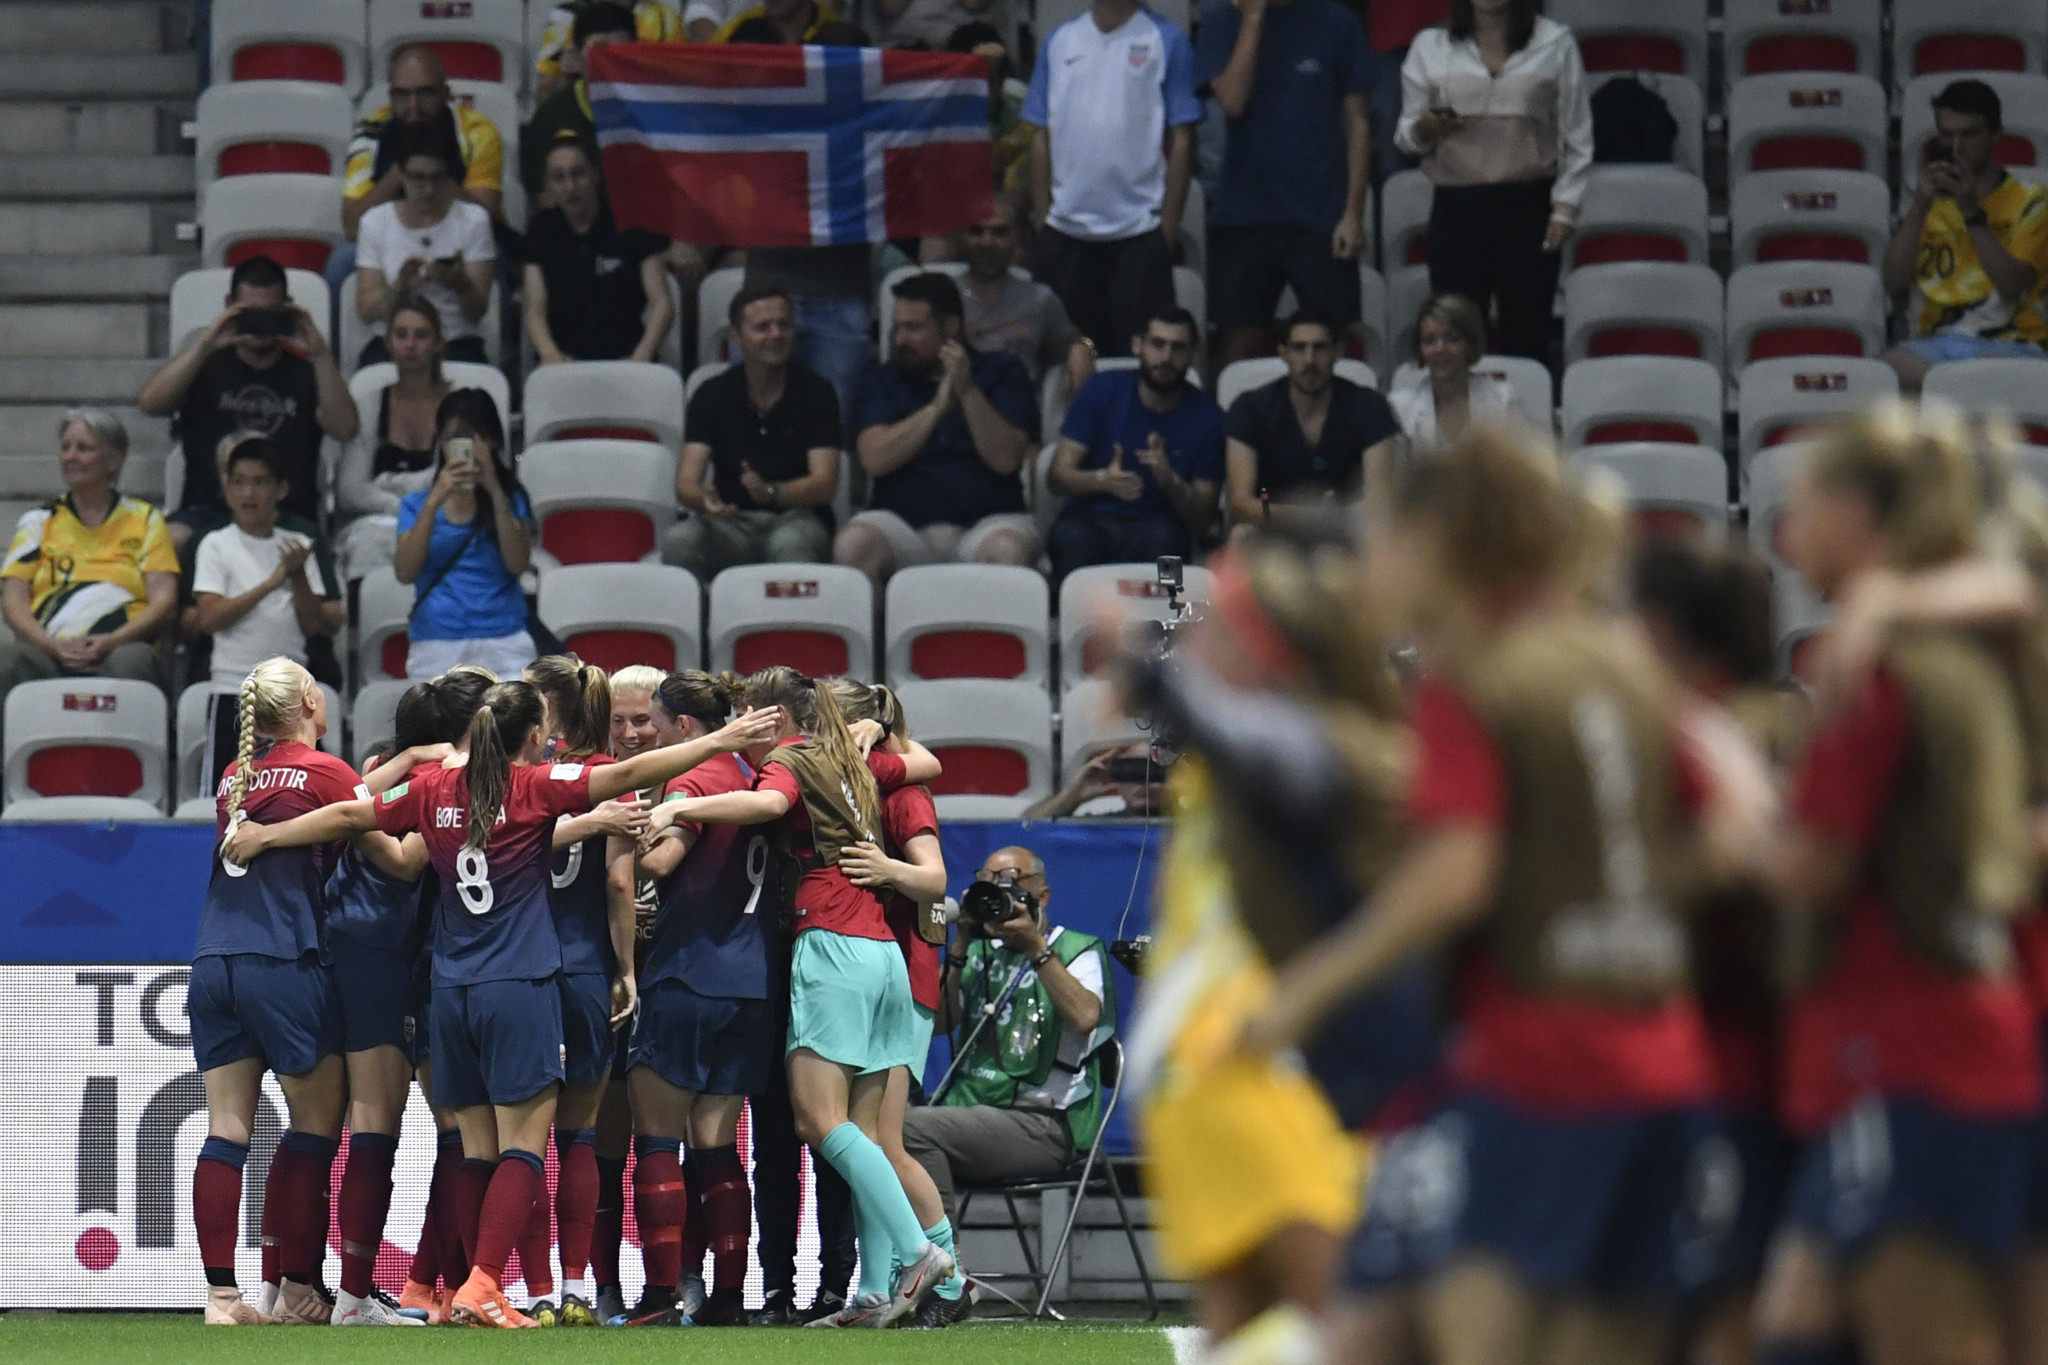 Isabell Herlovsen celebrates with her team mates and the Norway fans after her goal in Nice ©Getty Images